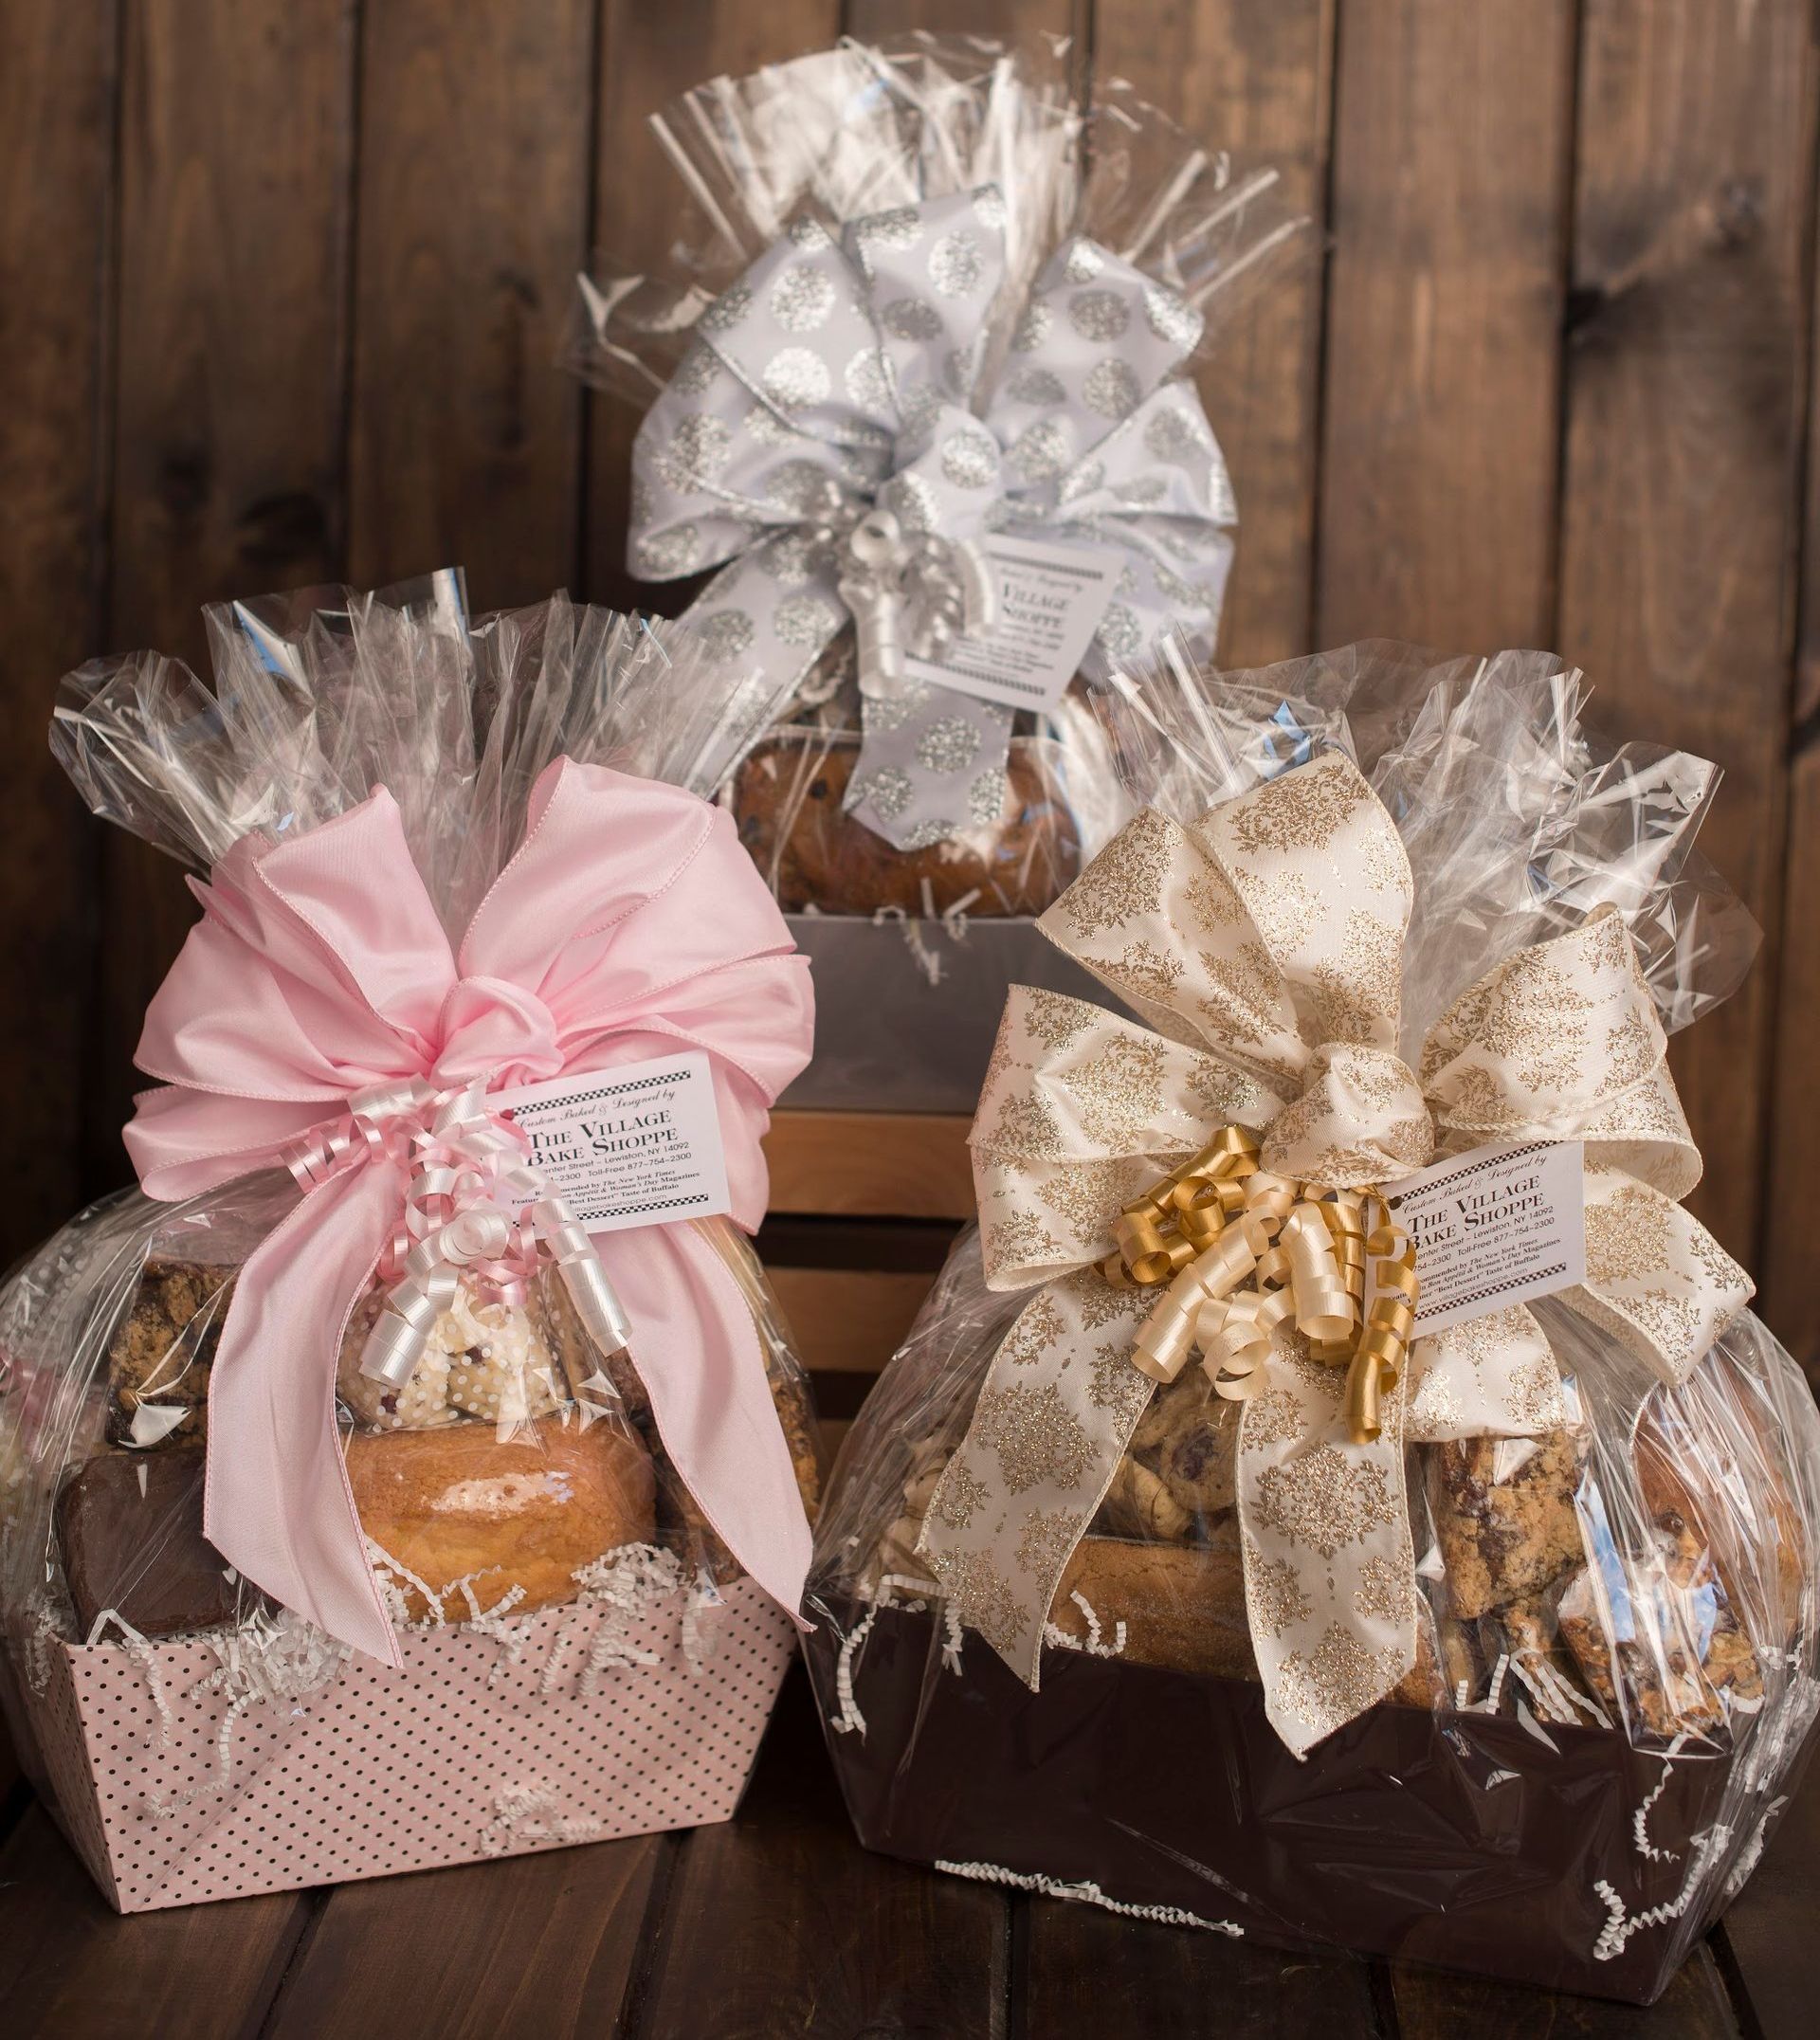 three gift baskets with bows on them are sitting on a wooden table .